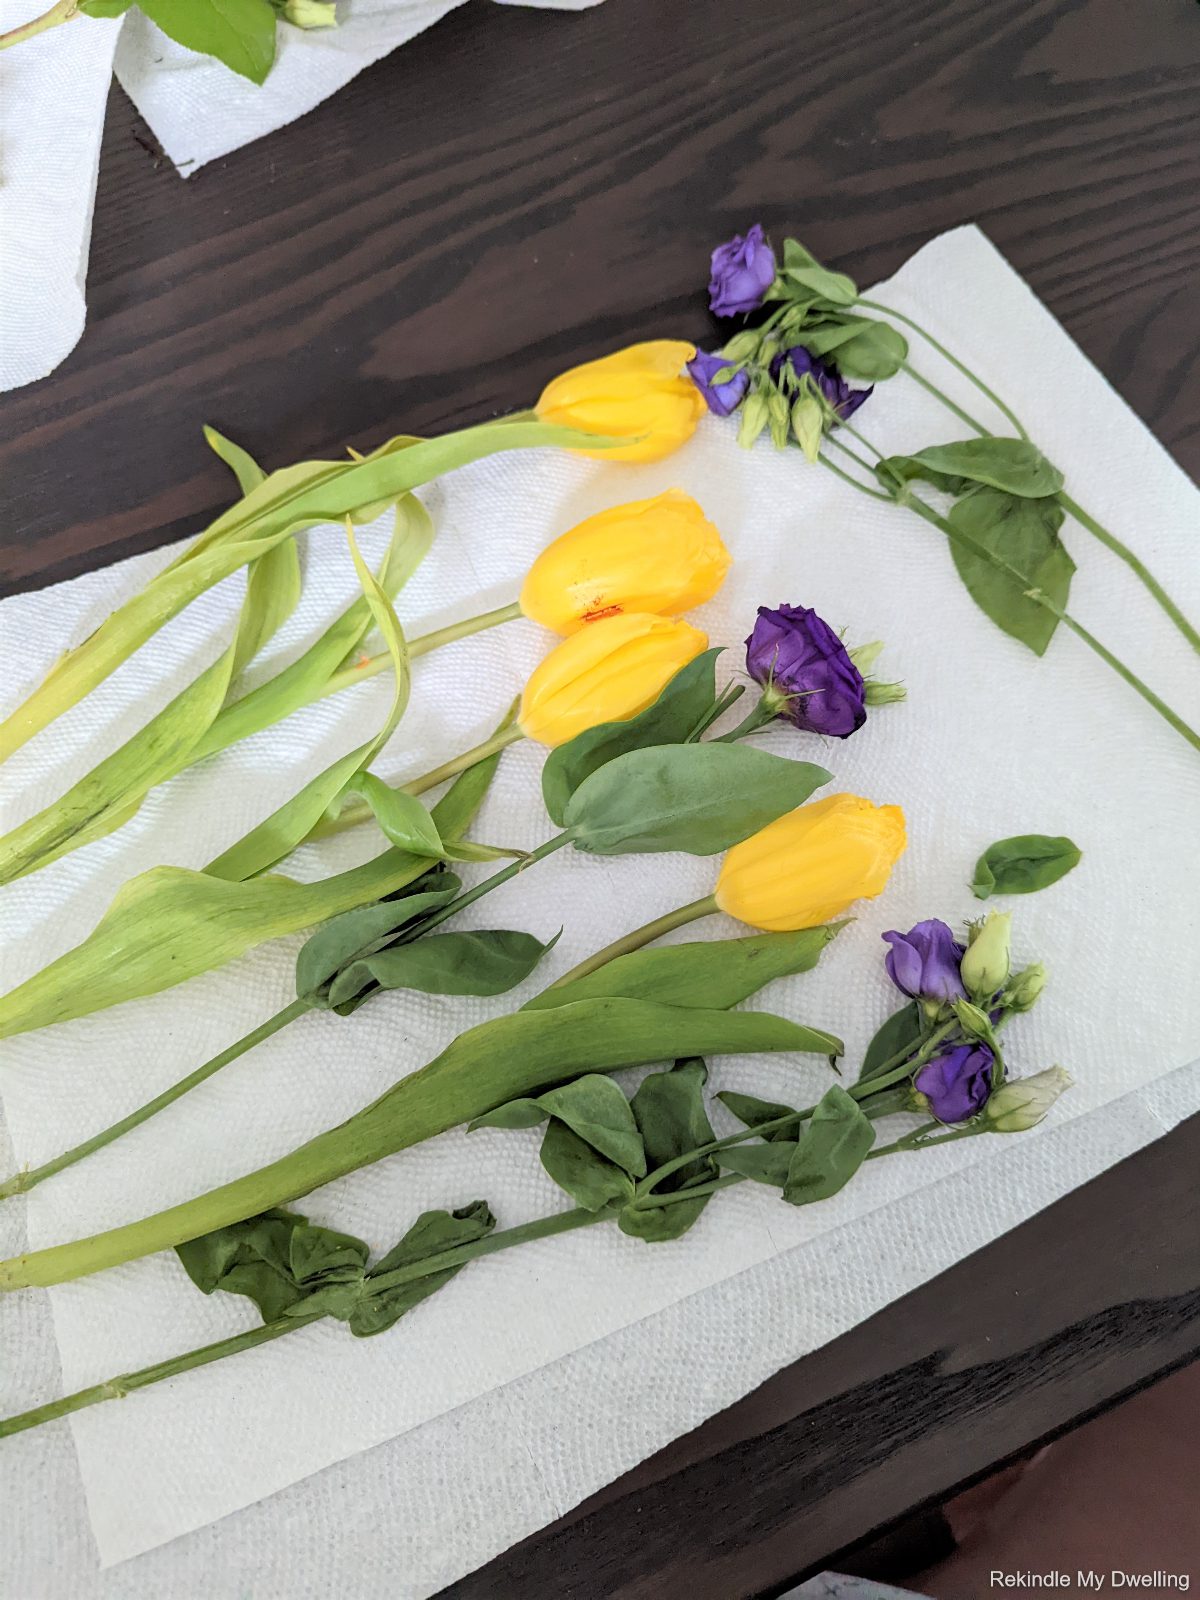 Laying flowers on a paper towel.